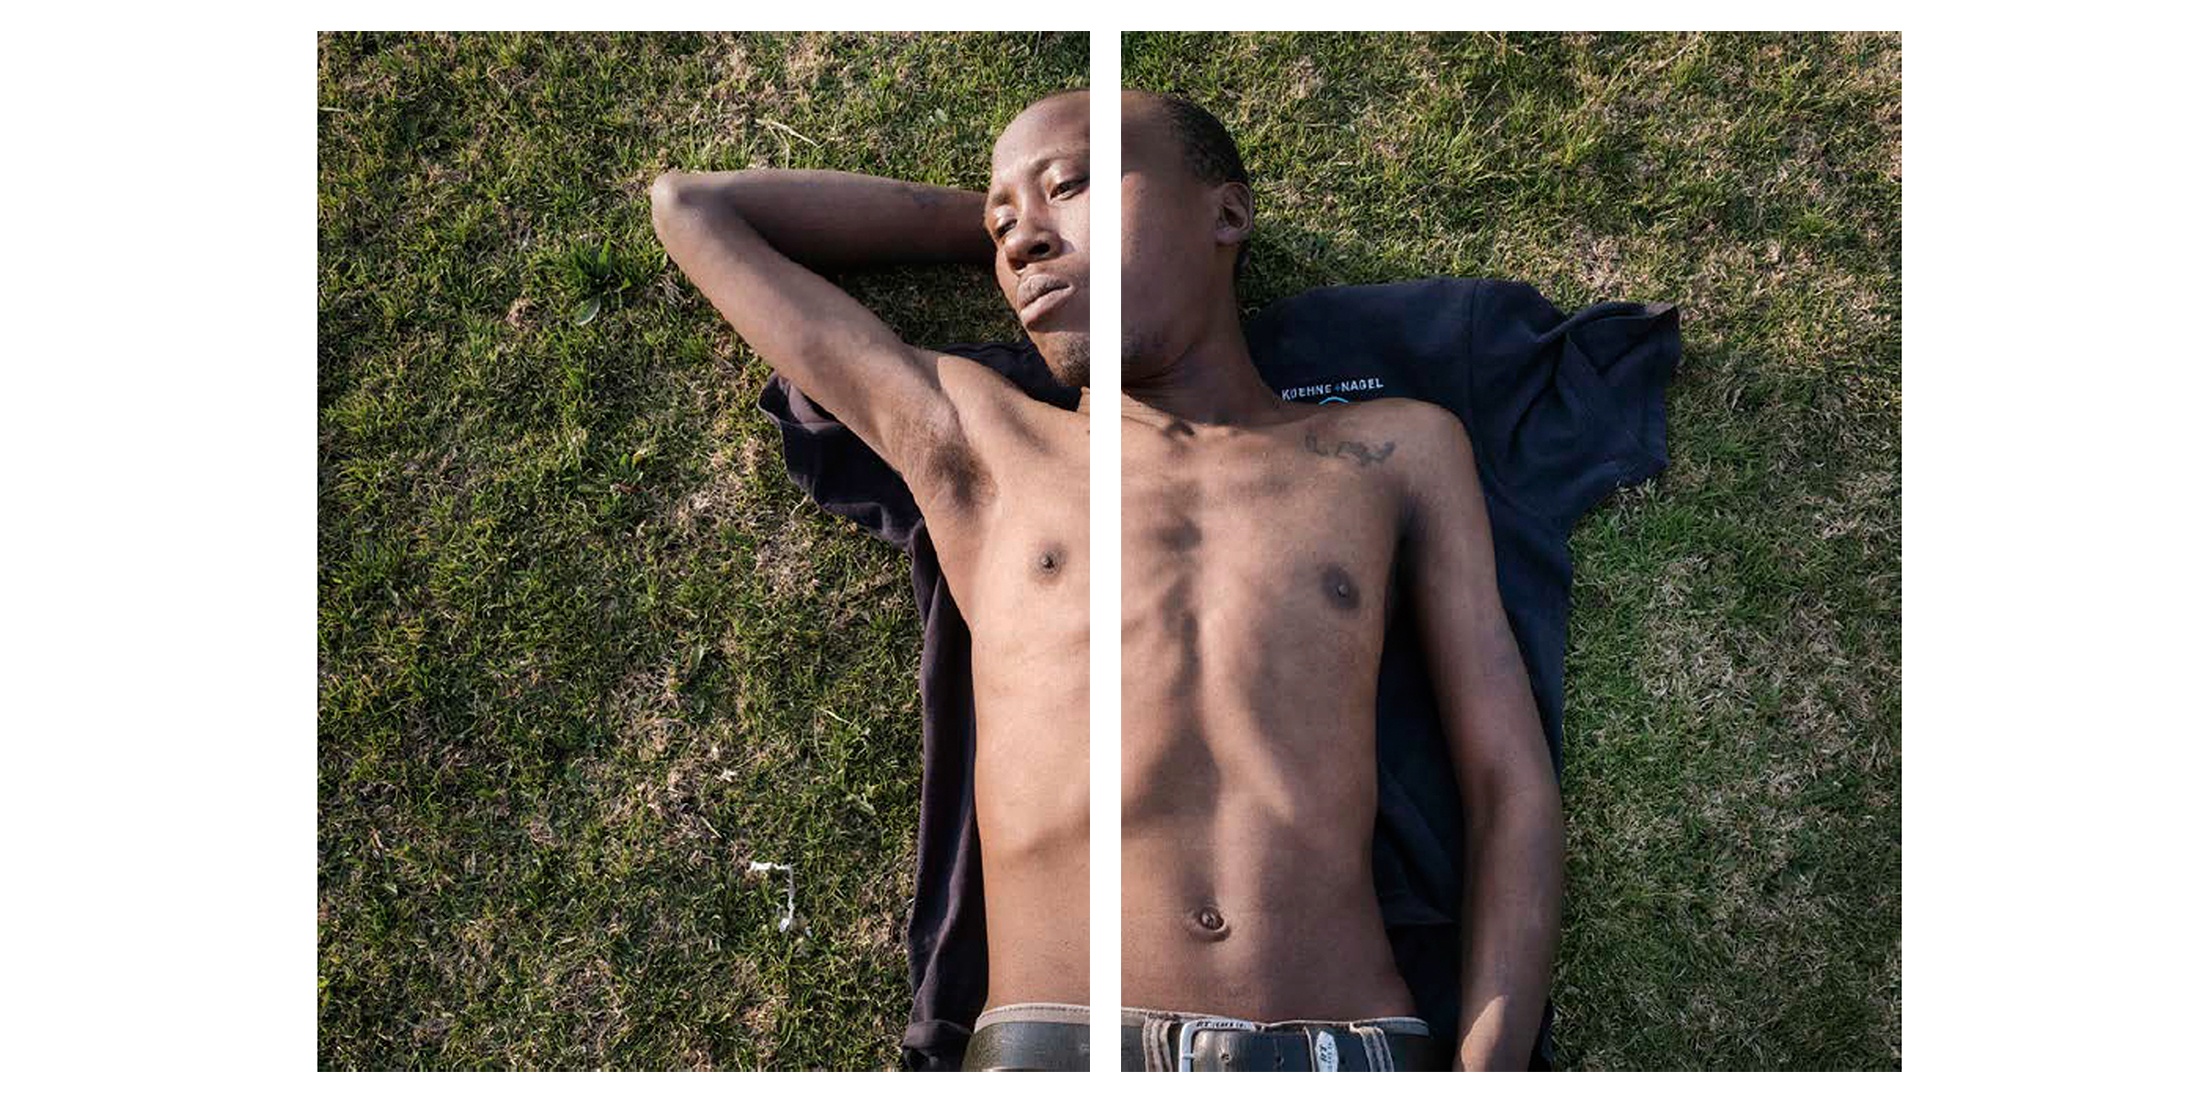 Lindokuhle Sobekwa's photograph 'Mandla' shows a shirtless individual lying face-up on a stretch of grass.
